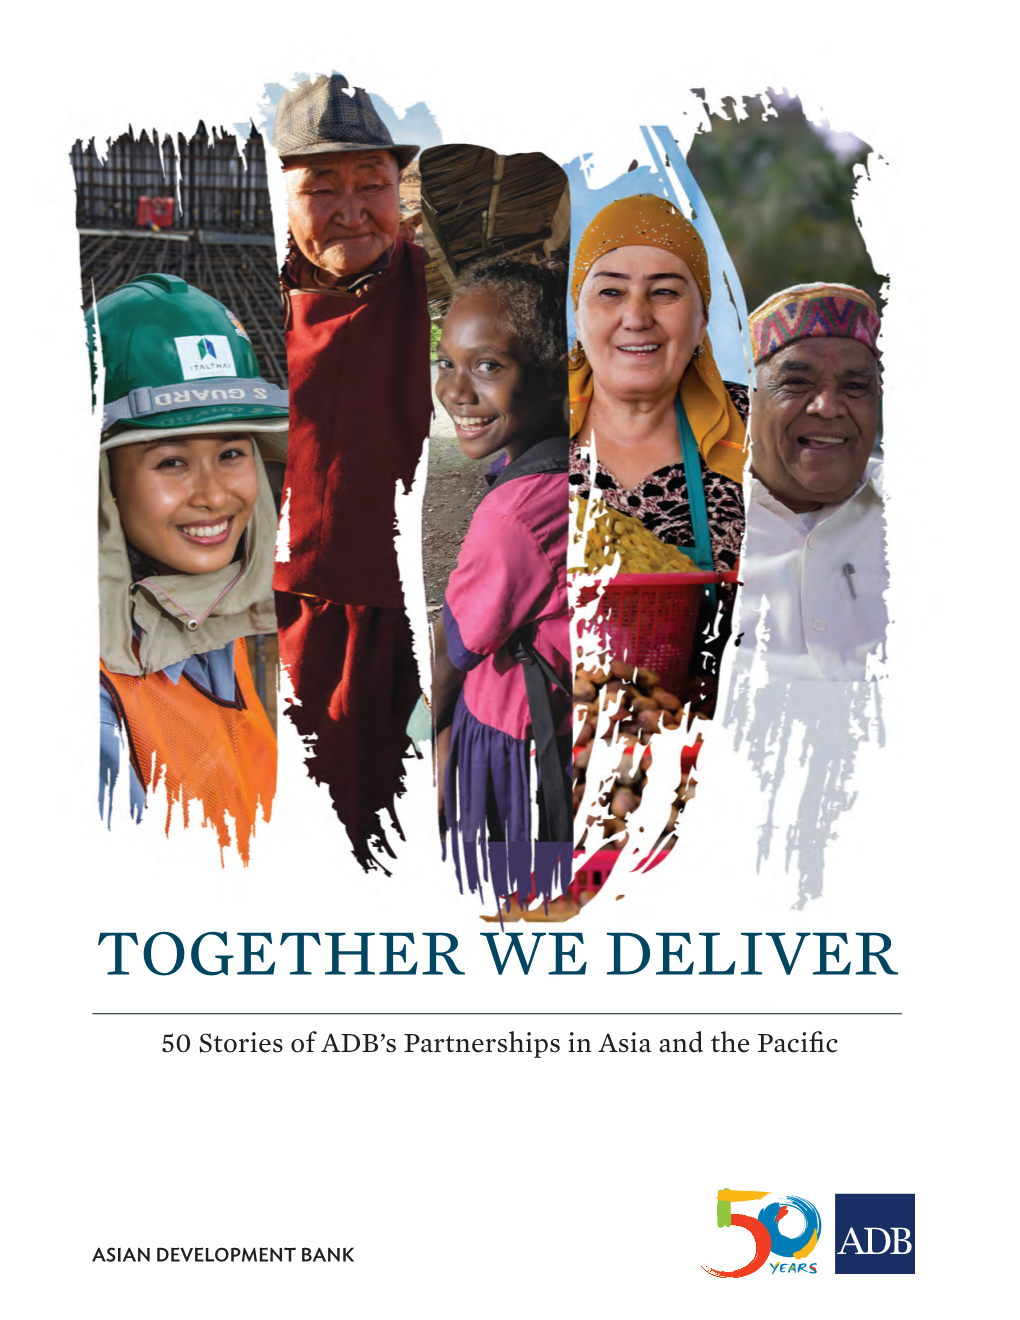 50 Stories of ADB's Partnerships in Asia and the Pacific